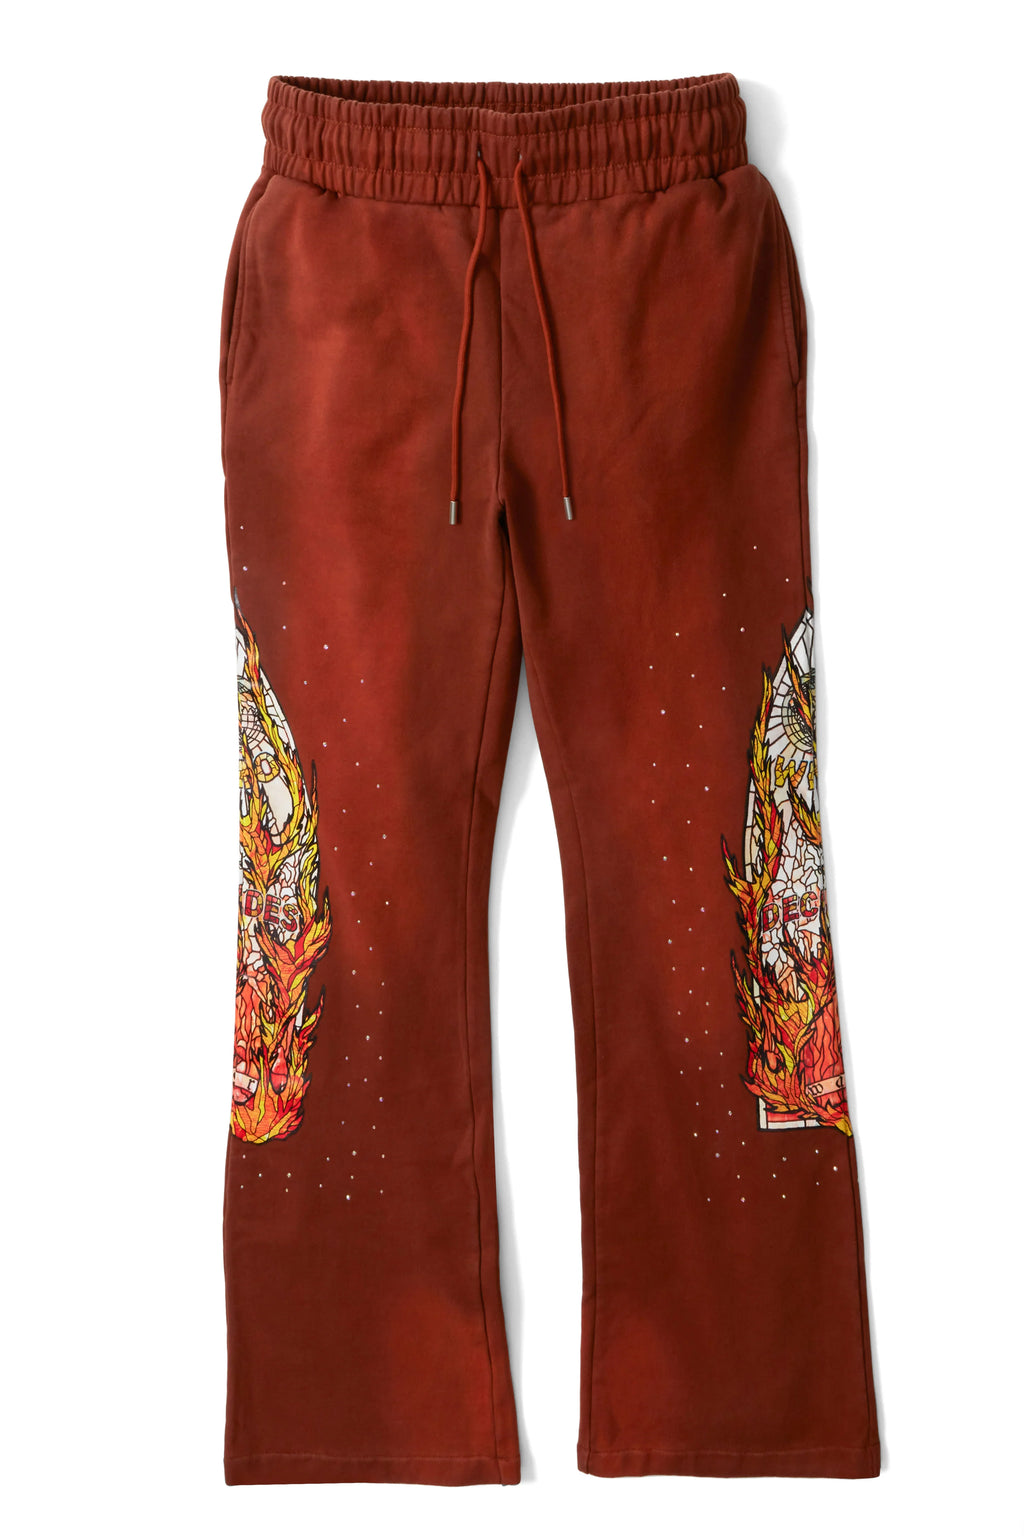 WHO DECIDES WAR FLAME GLASS SWEATPANT BROWN